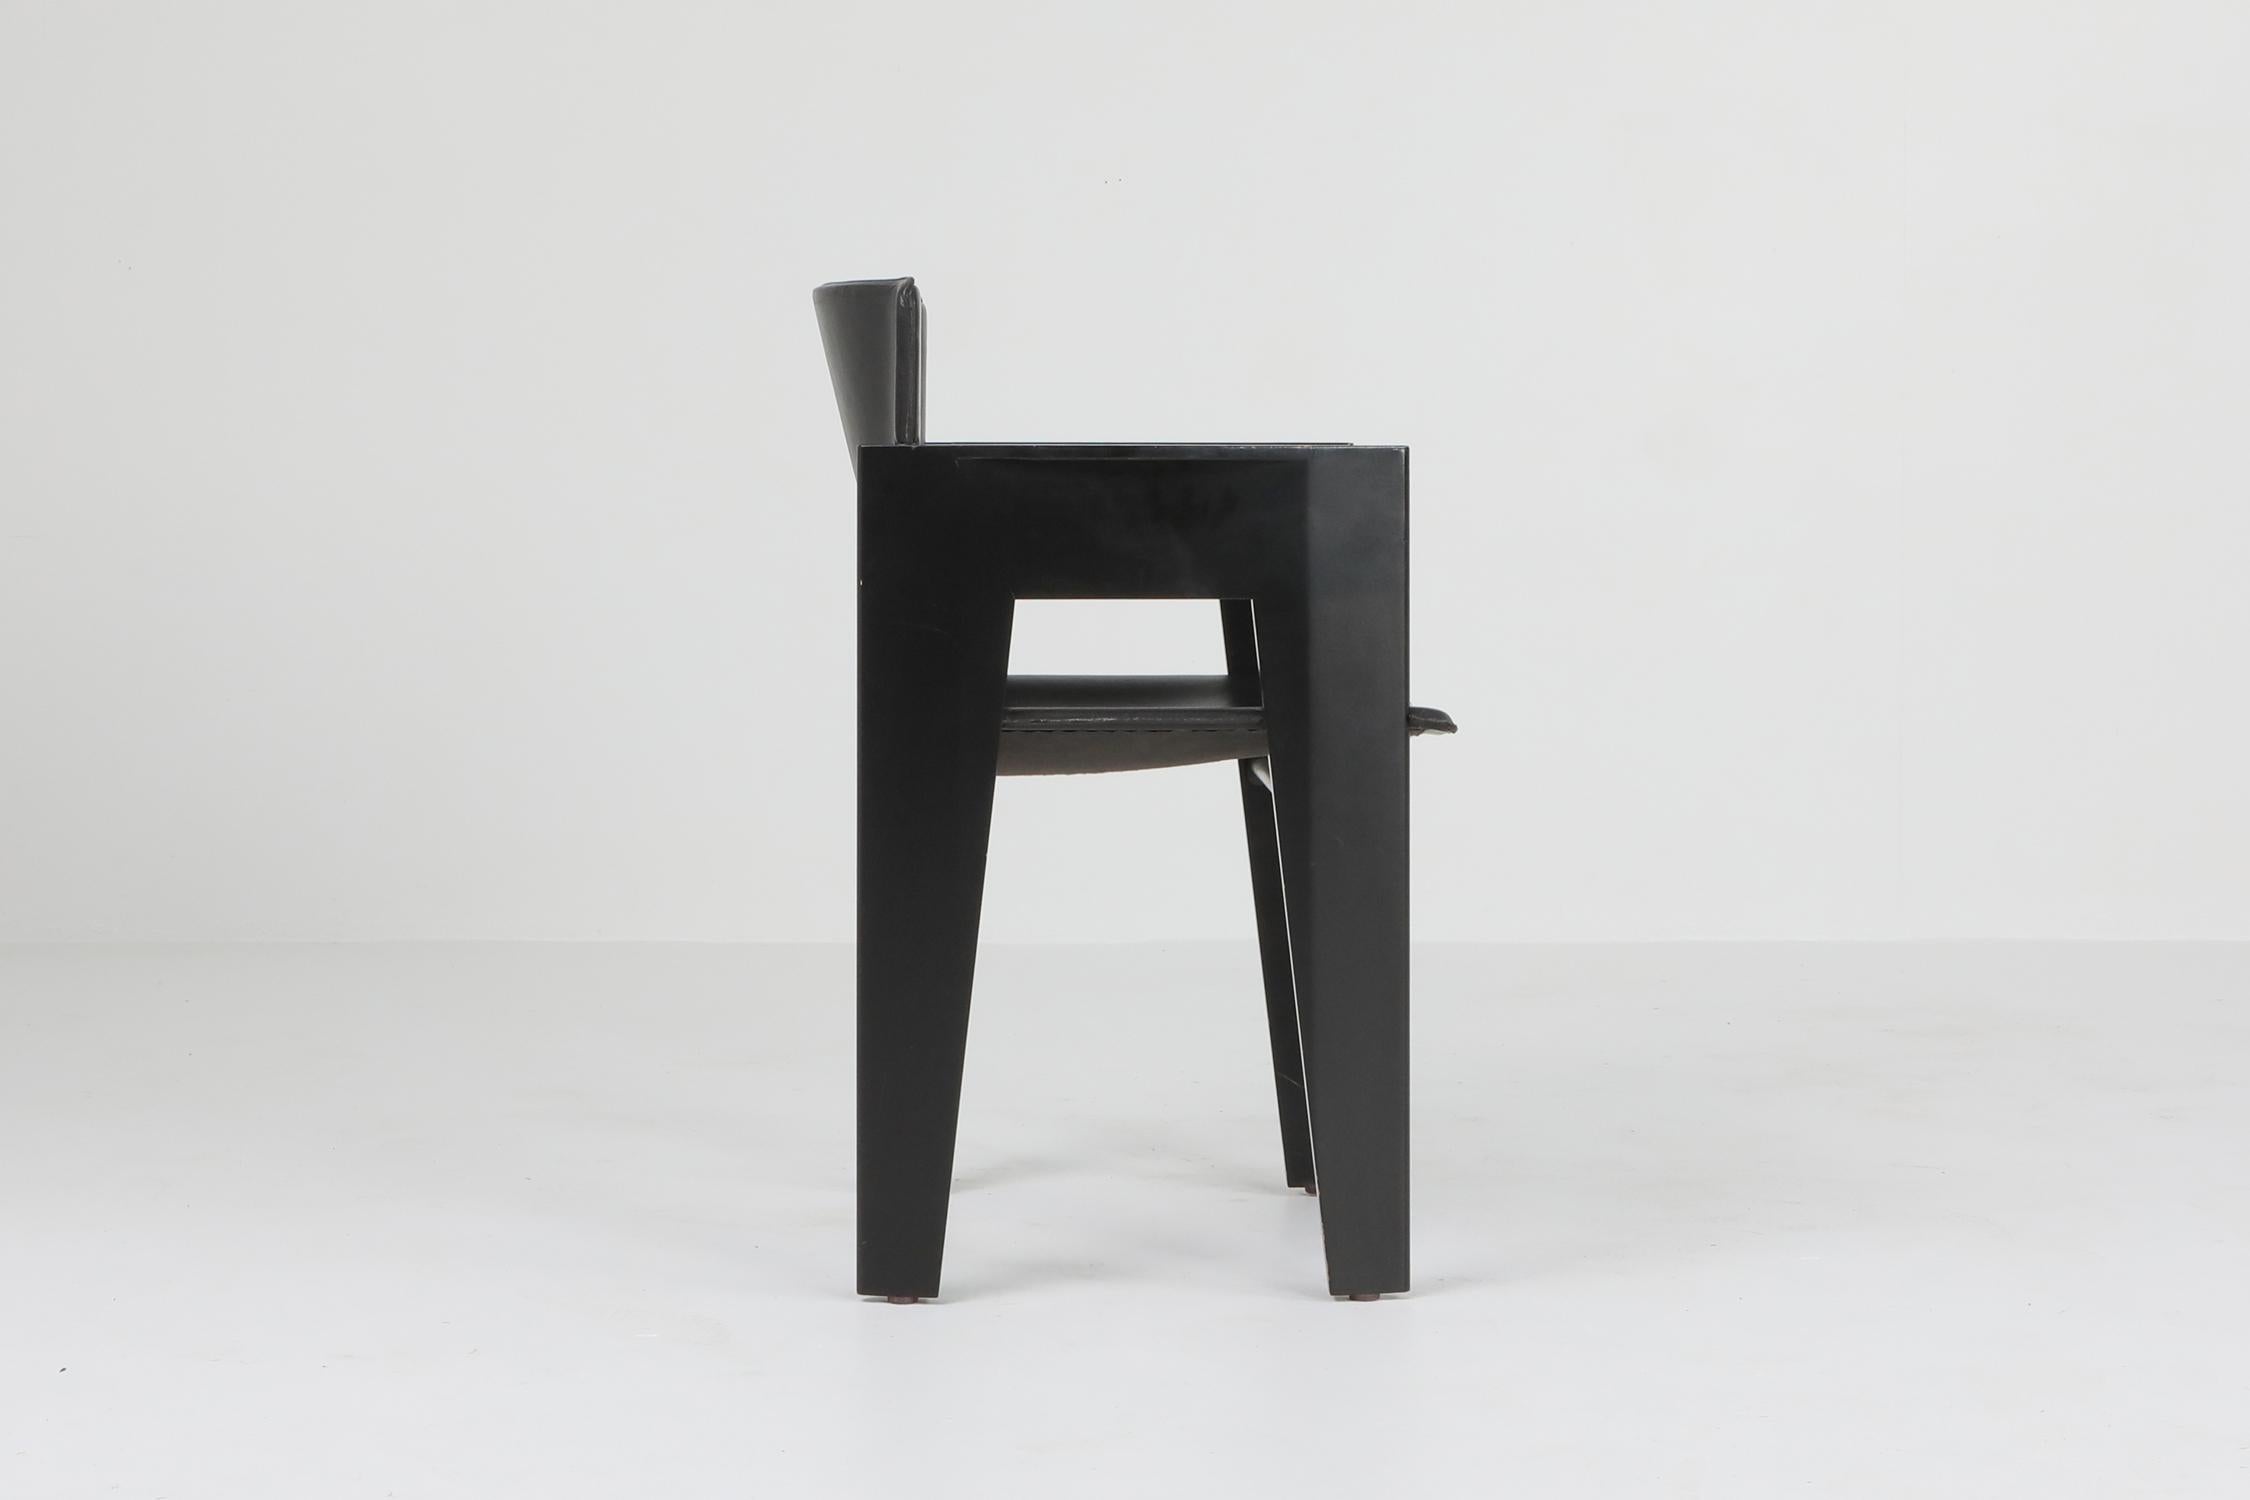 Postmodern chair by Arco, The Netherlands, ebonized oak and saddle leather chairs, 1980s
unusual armchair designed by a Dutch architect.
Sculptural and elegant appearance mixed with quality materials make these a great design.
 